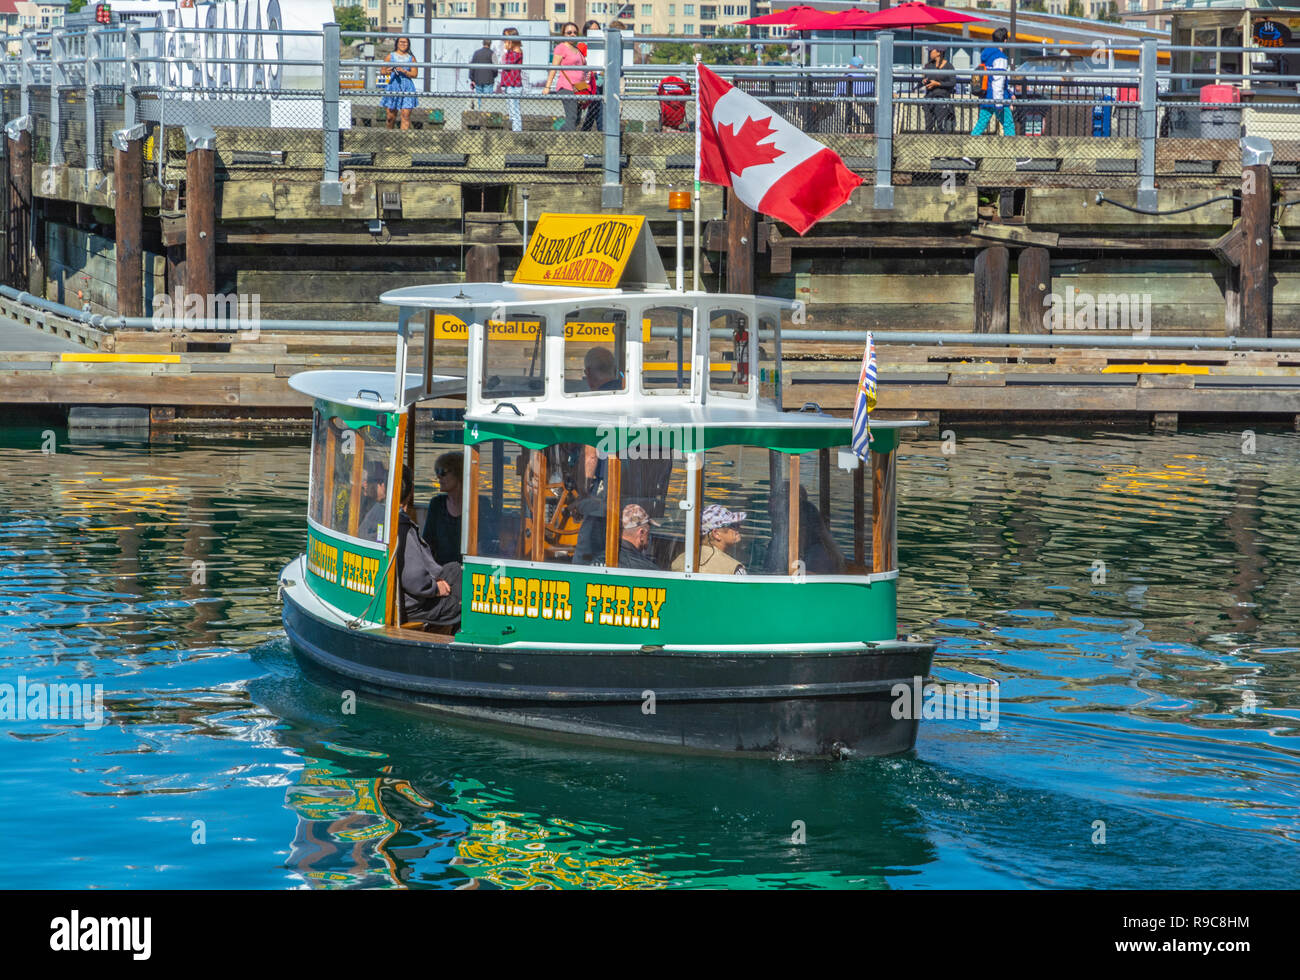 Canada, British Columbia, Victoria, harbour, water taxi, harbour ferry Stock Photo